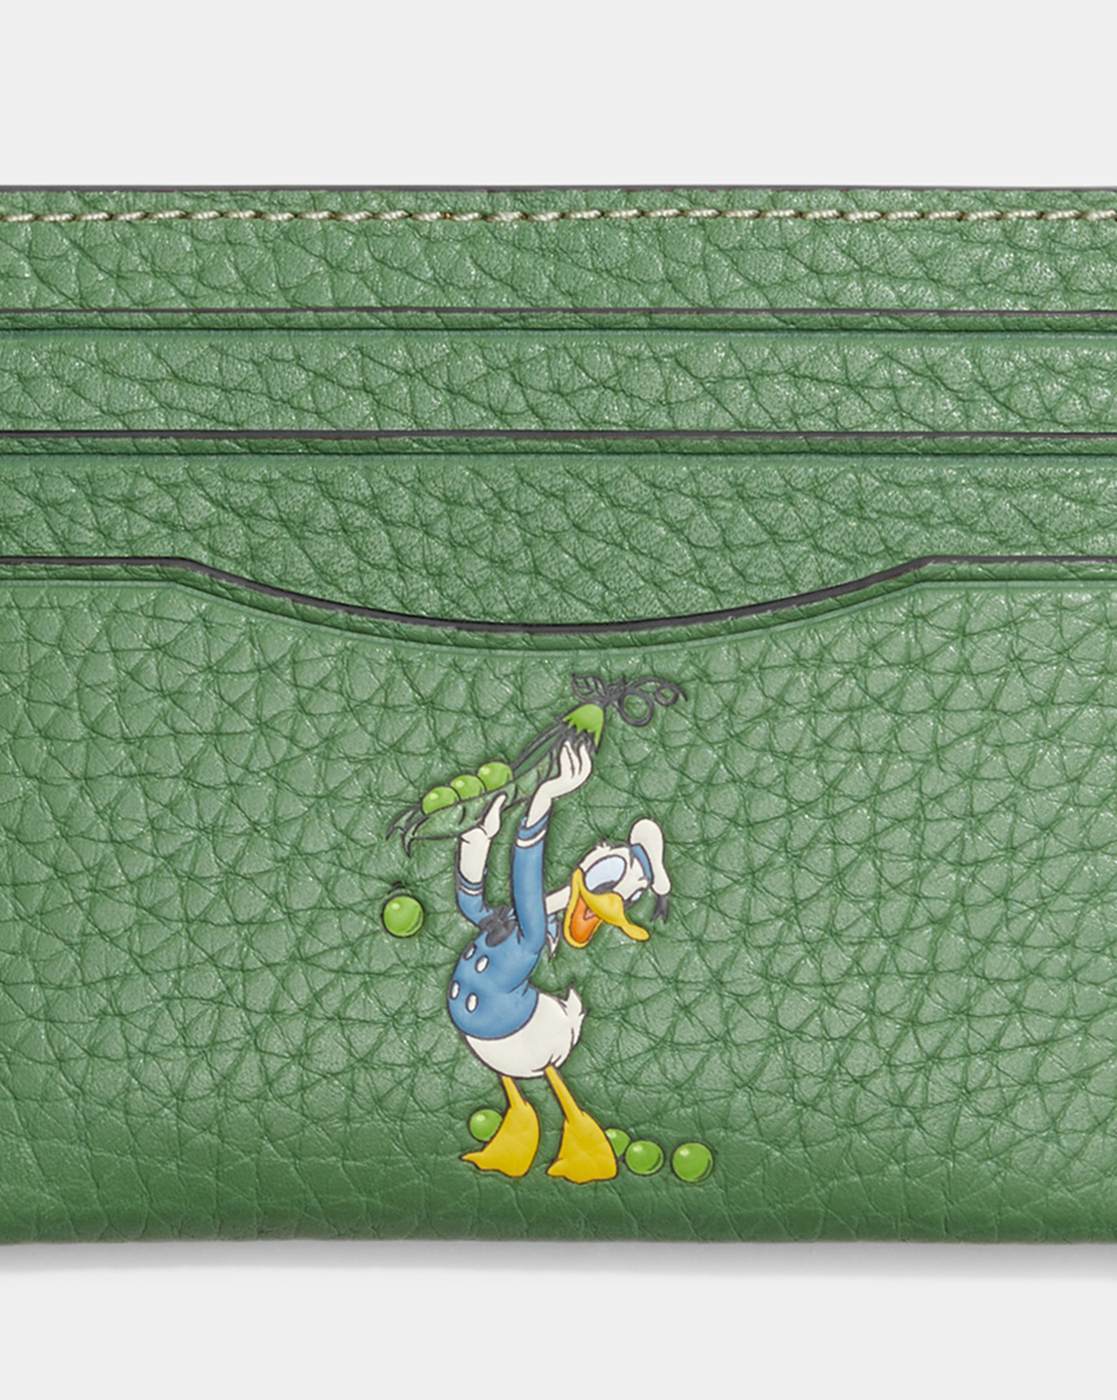 GUCCI x Disney Collaboration Mickey Mouse Card Case Holder Wallet